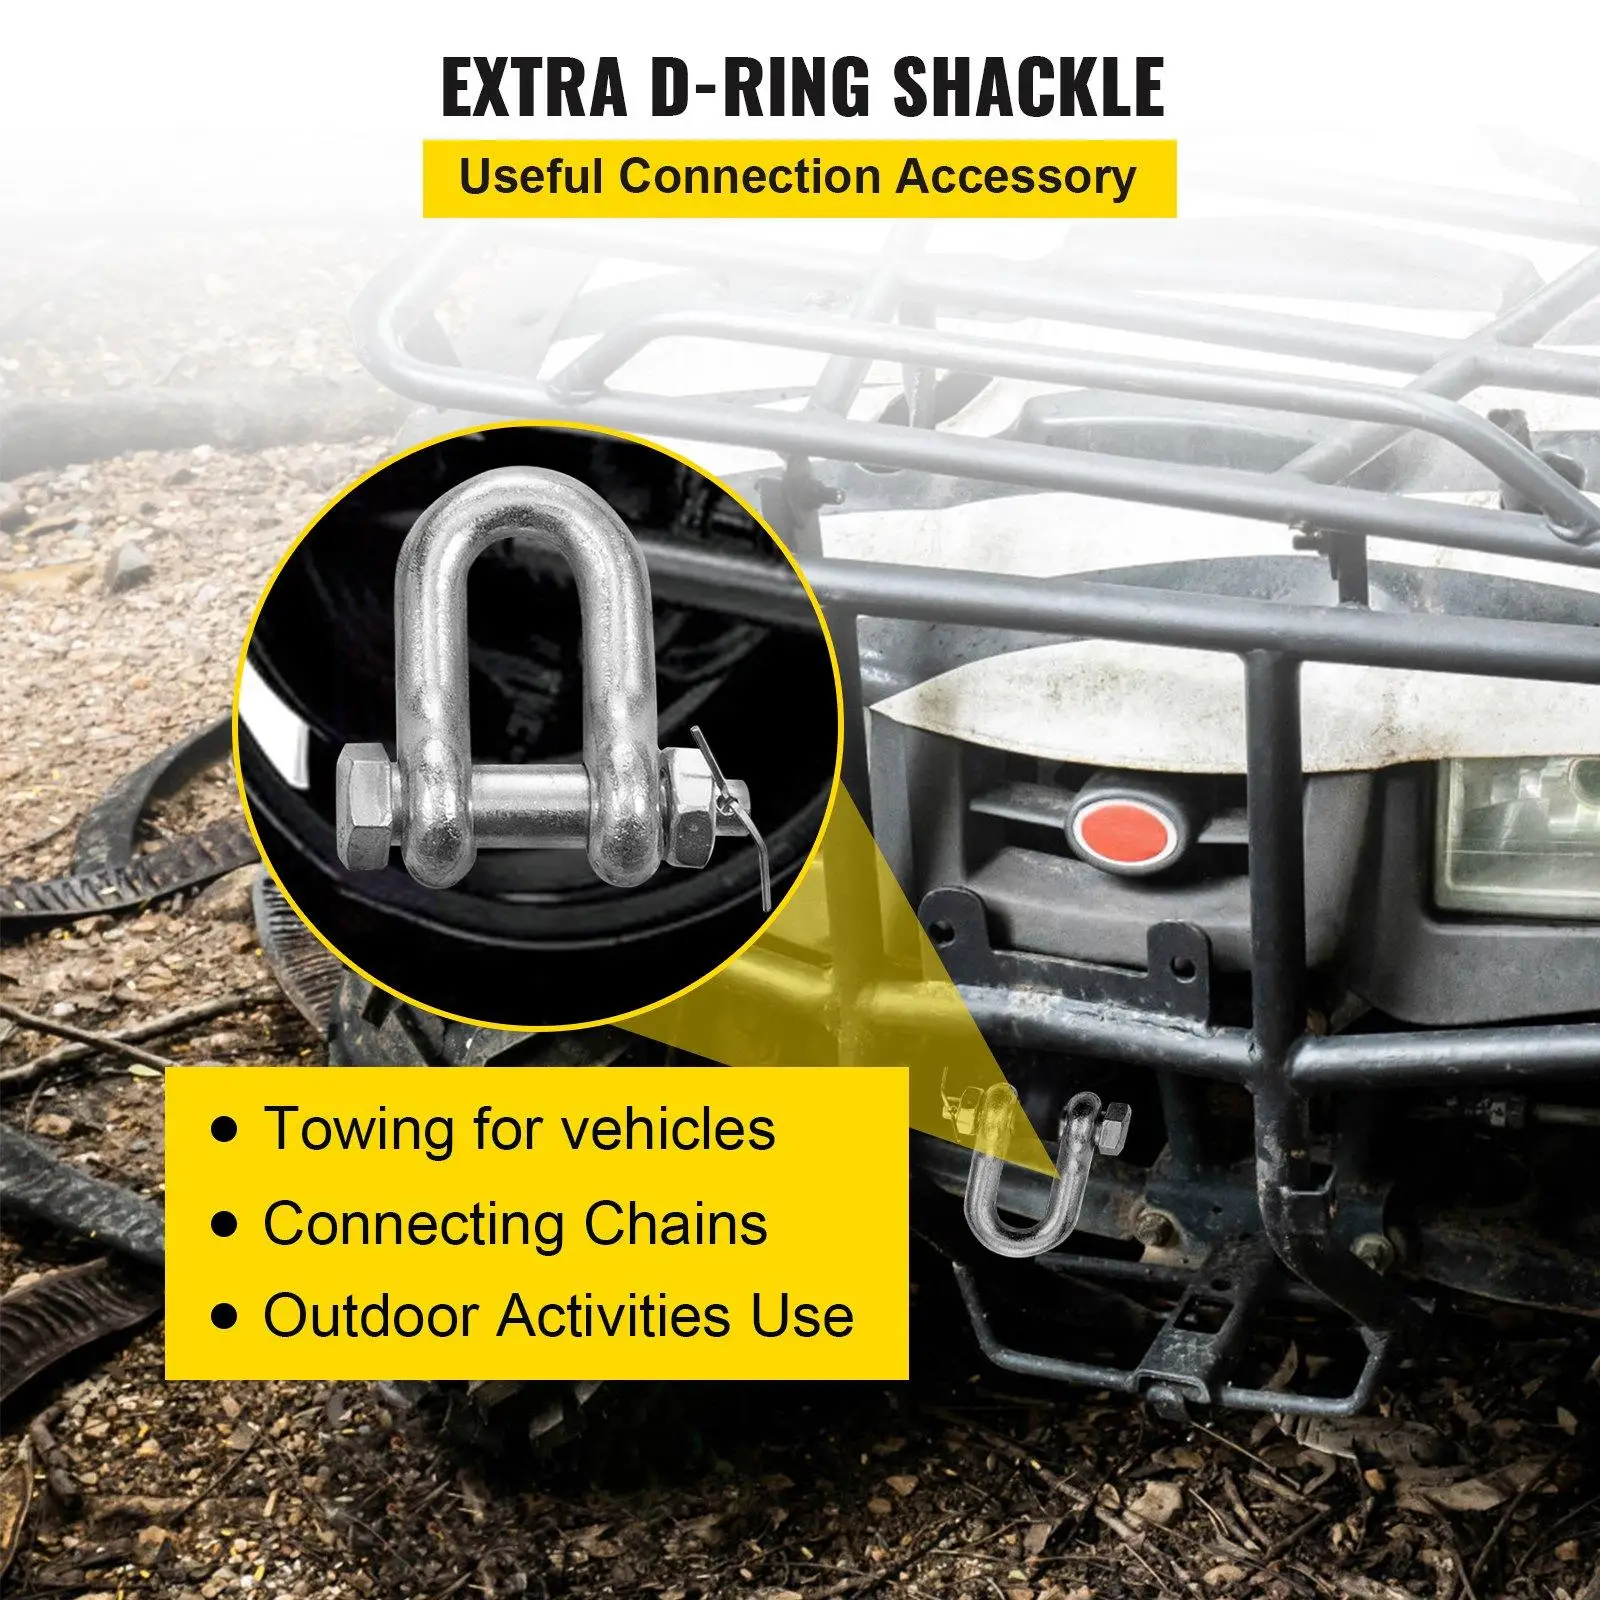 Extra D-ring shackle